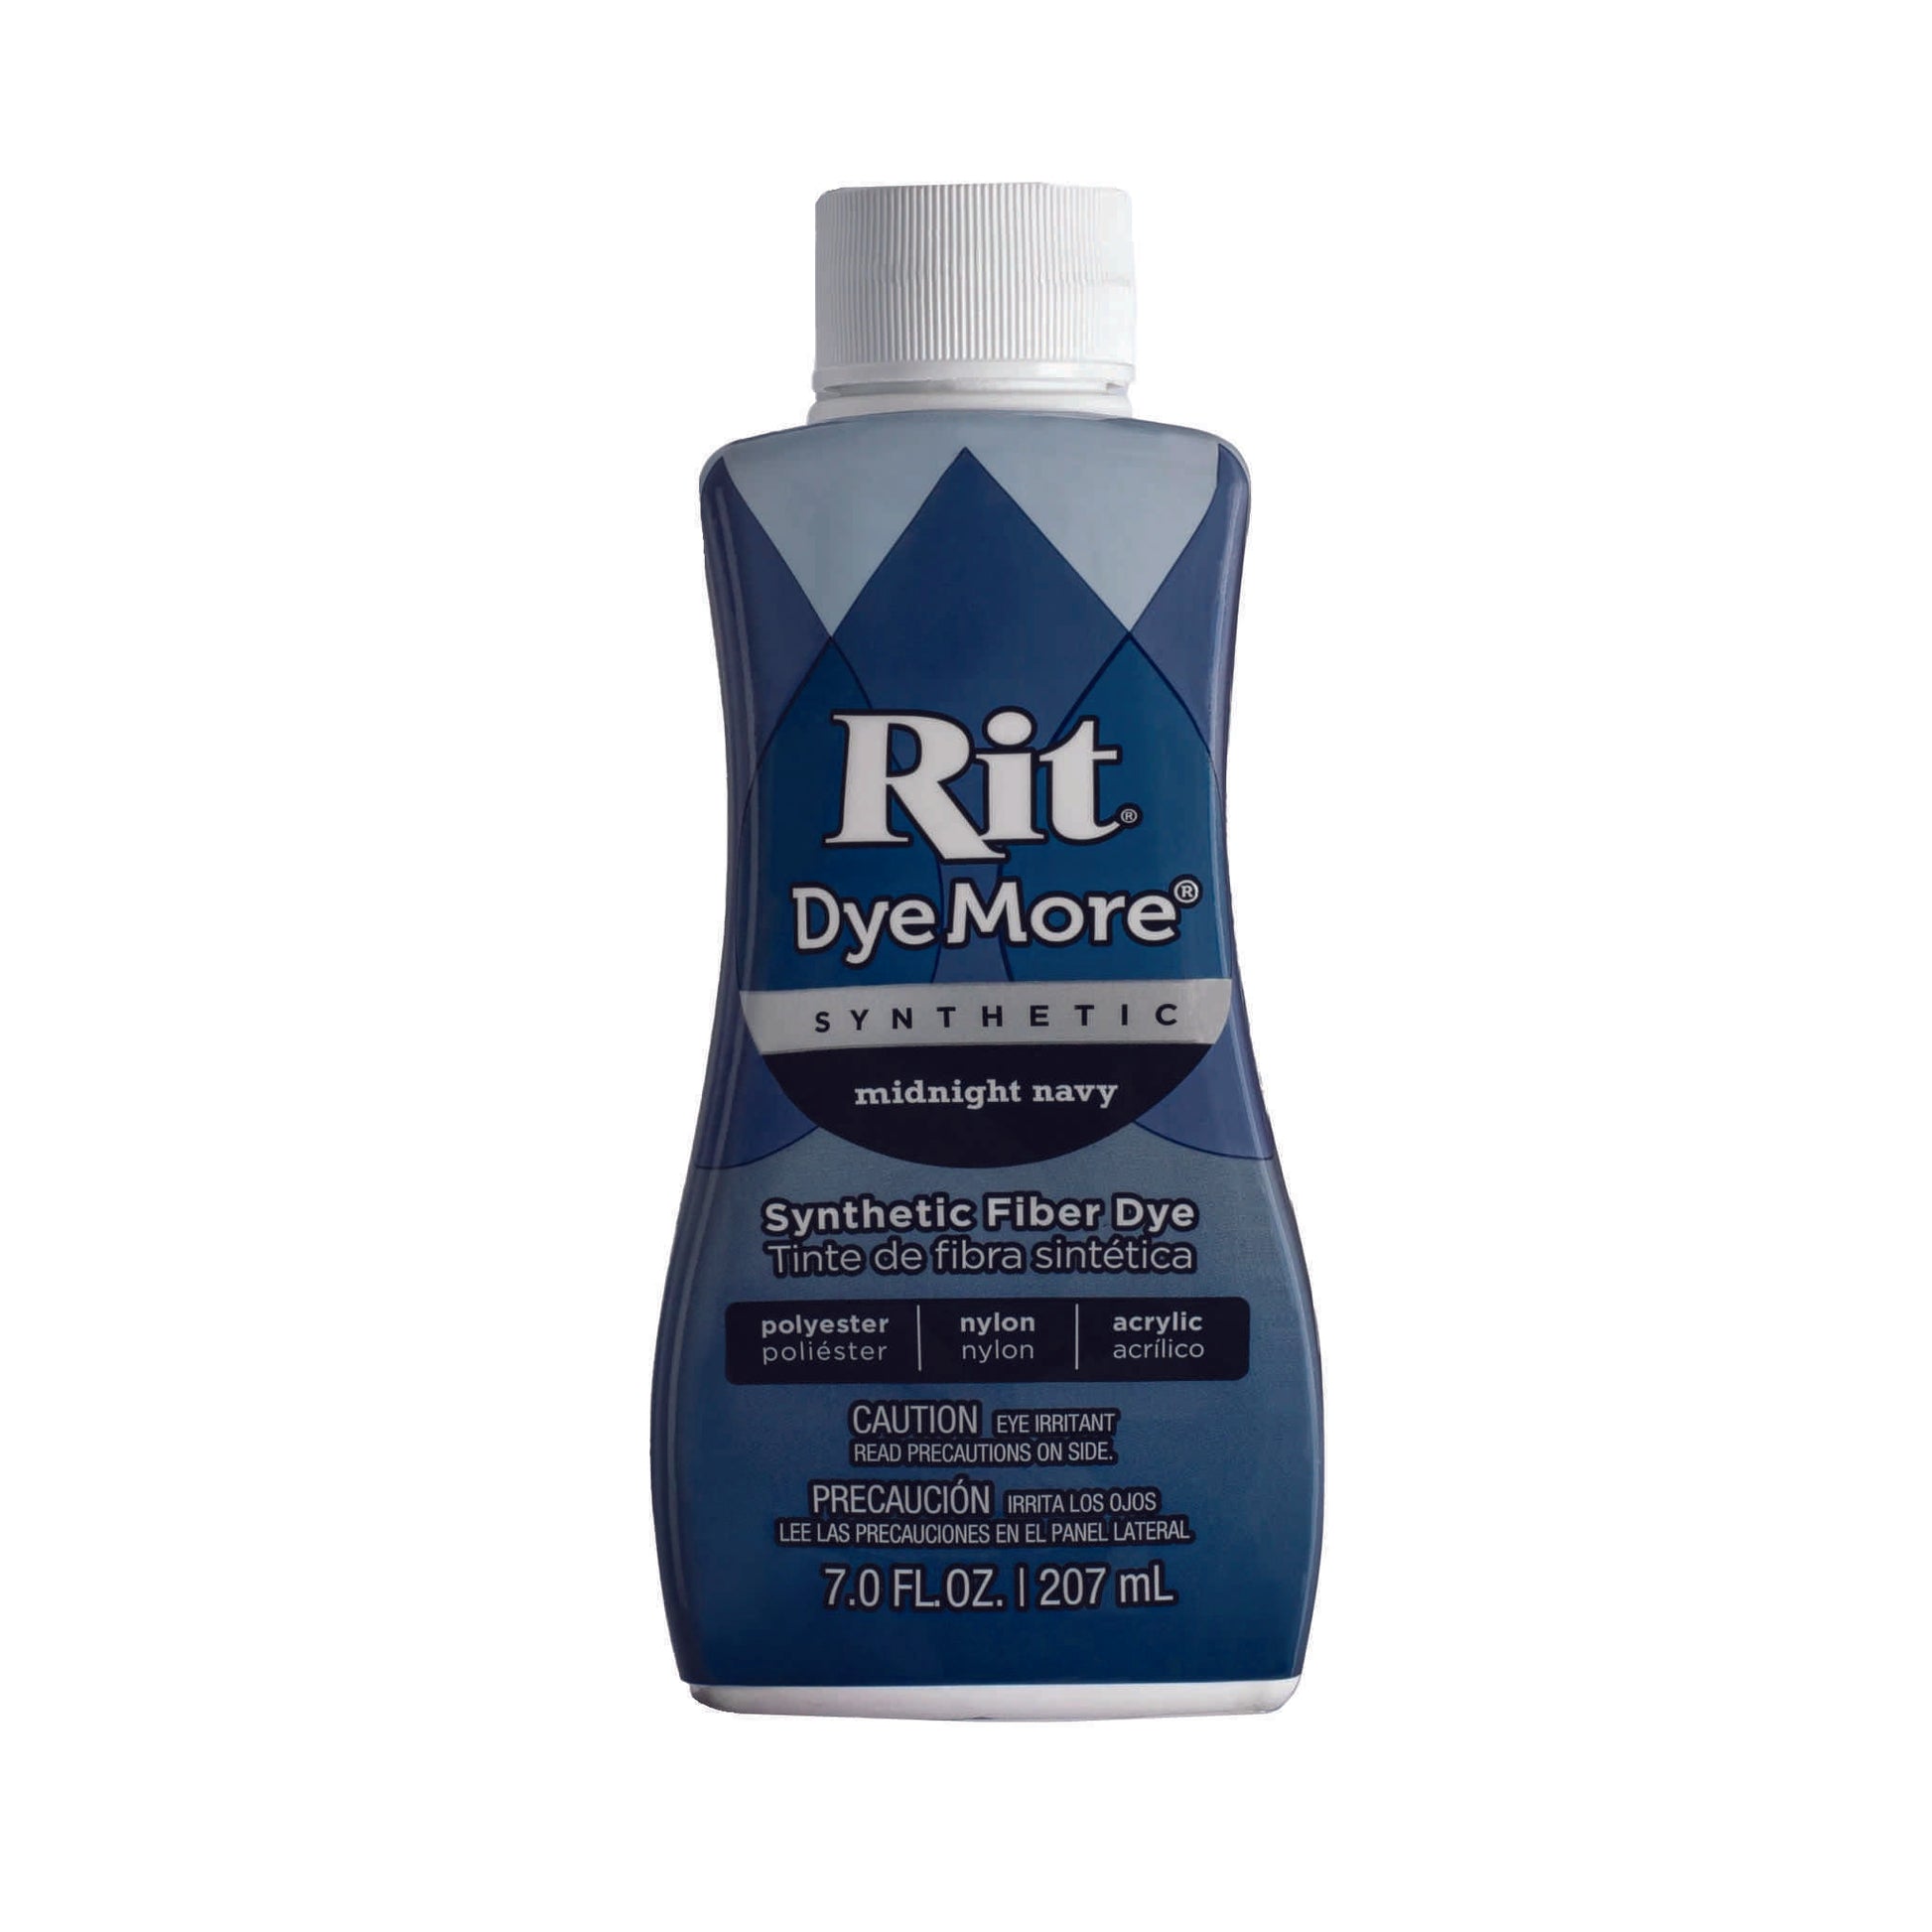 Midnight navy coloured Rit DyeMore synthetic fibre dye bottle on a white background.